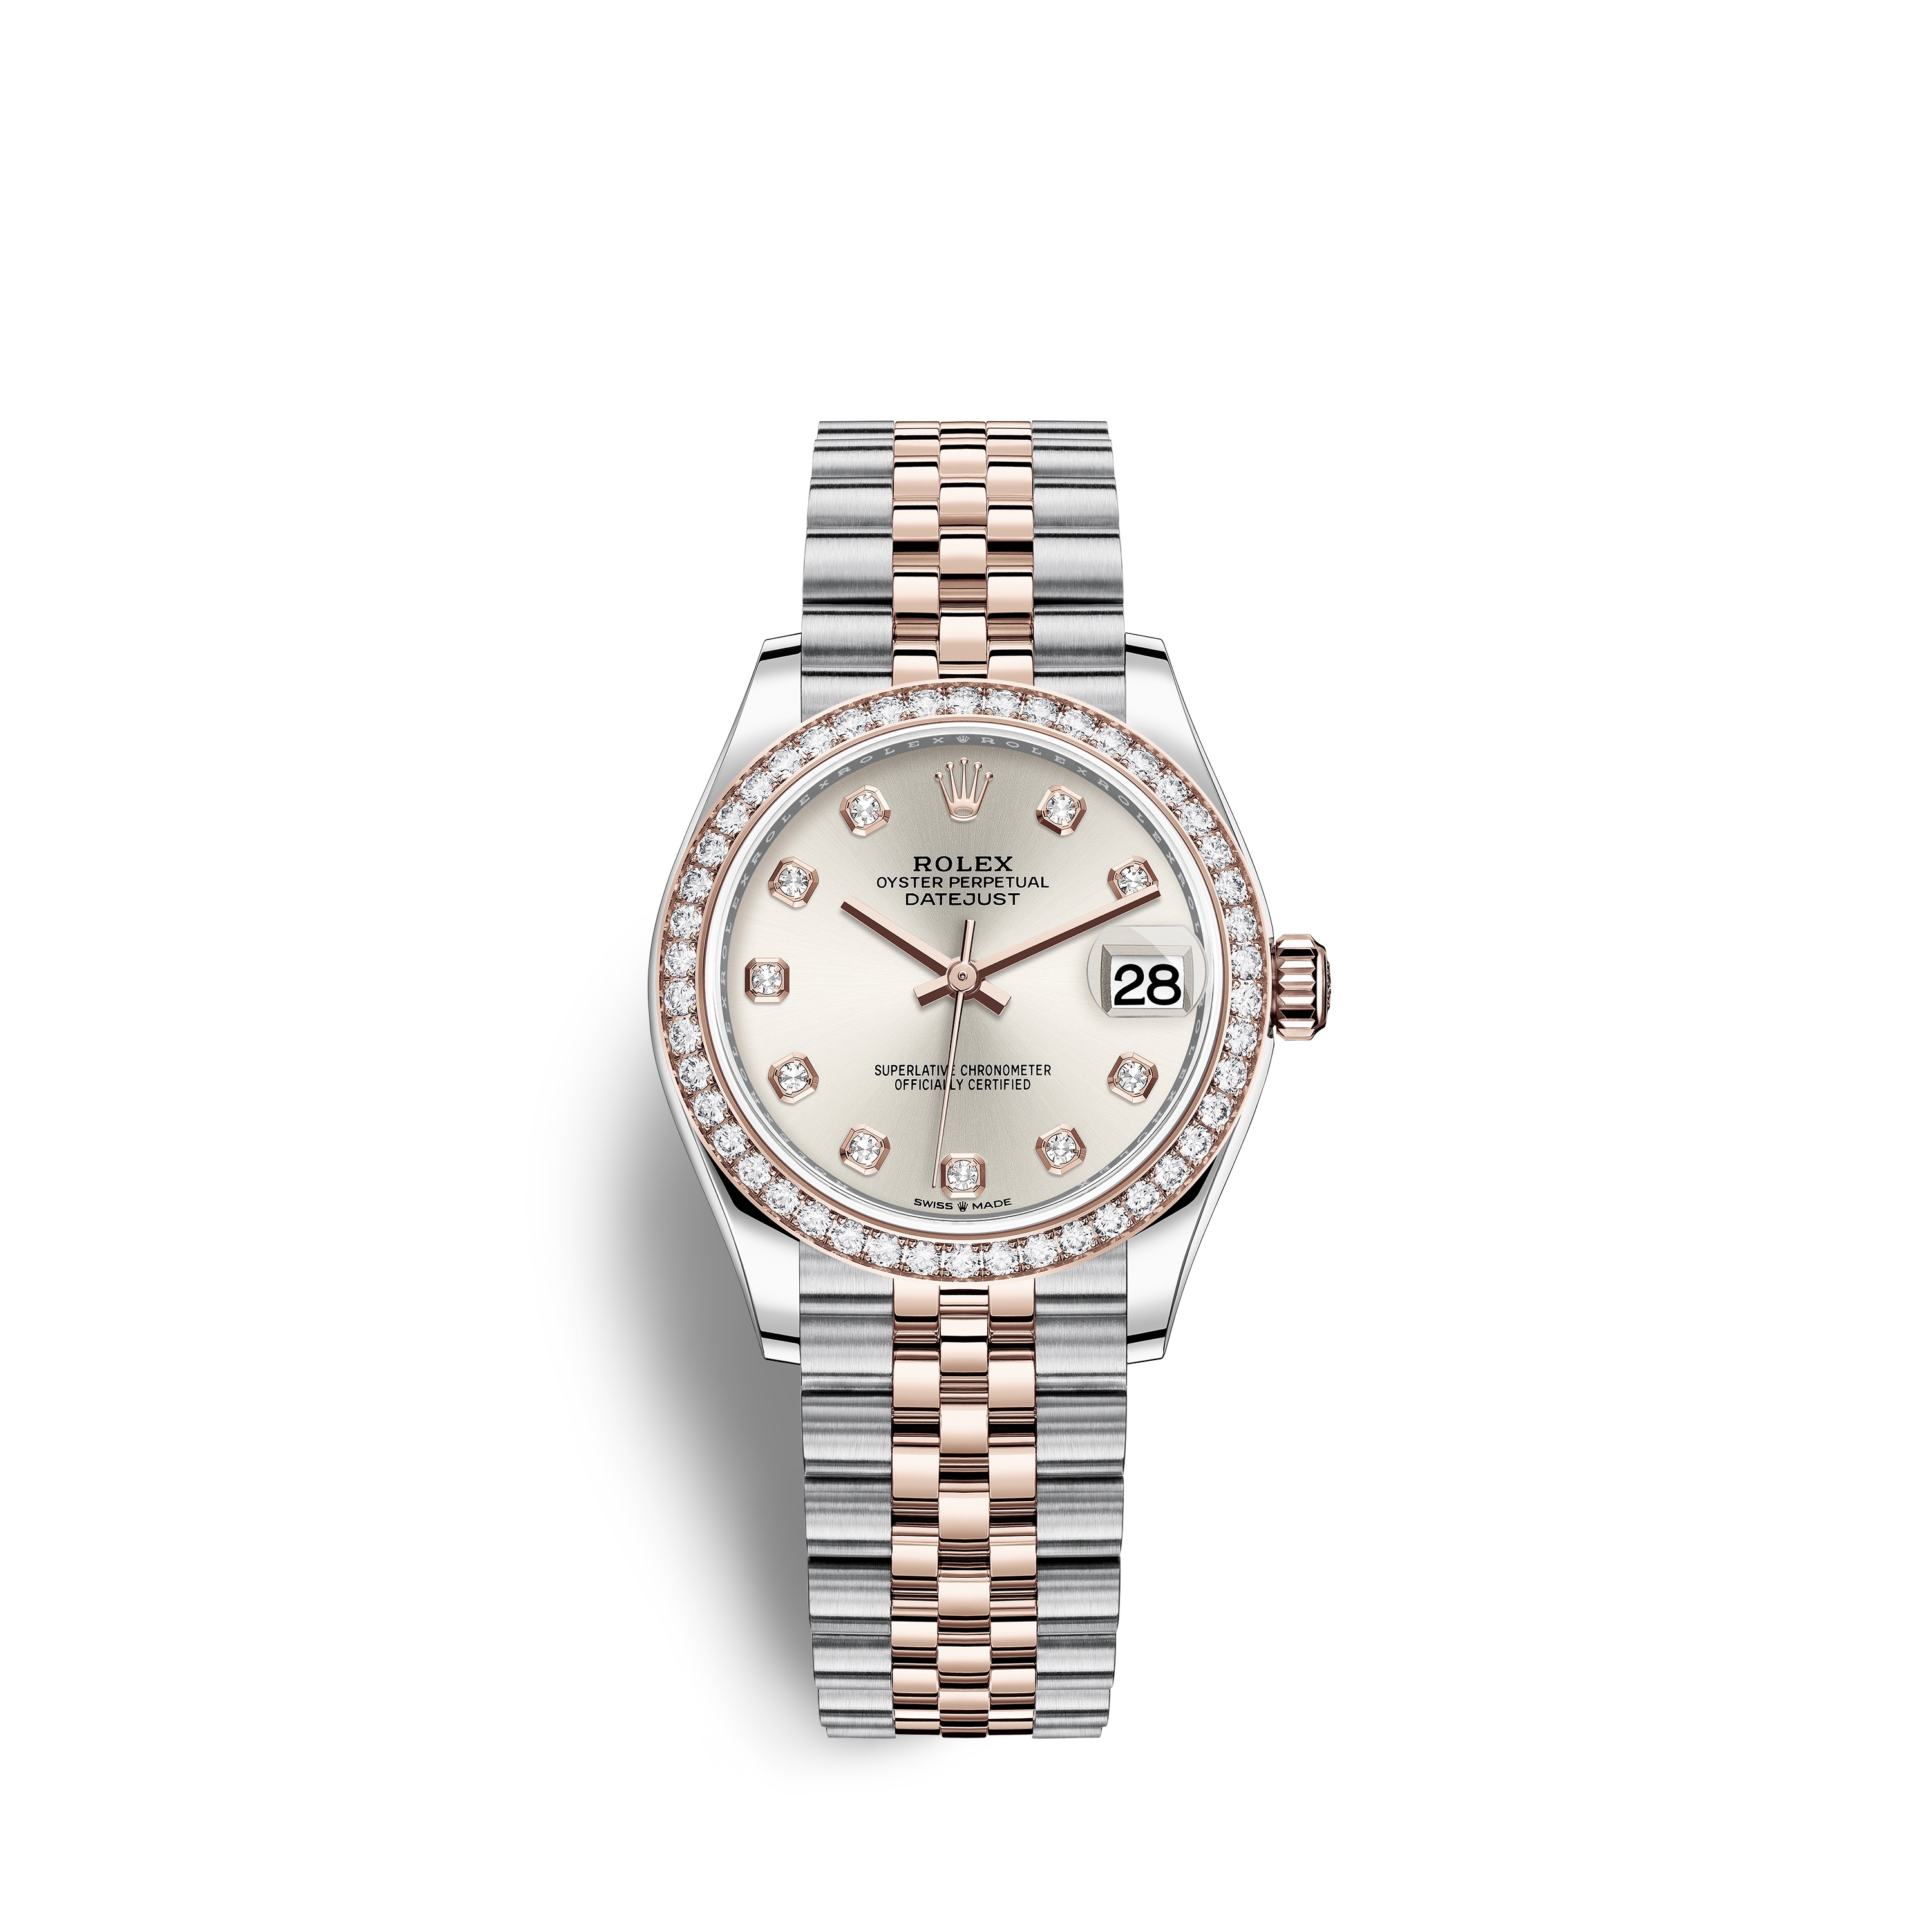 Datejust 31 278381RBR Rose Gold, Stainless Steel & Diamonds Watch (Silver Set with Diamonds)